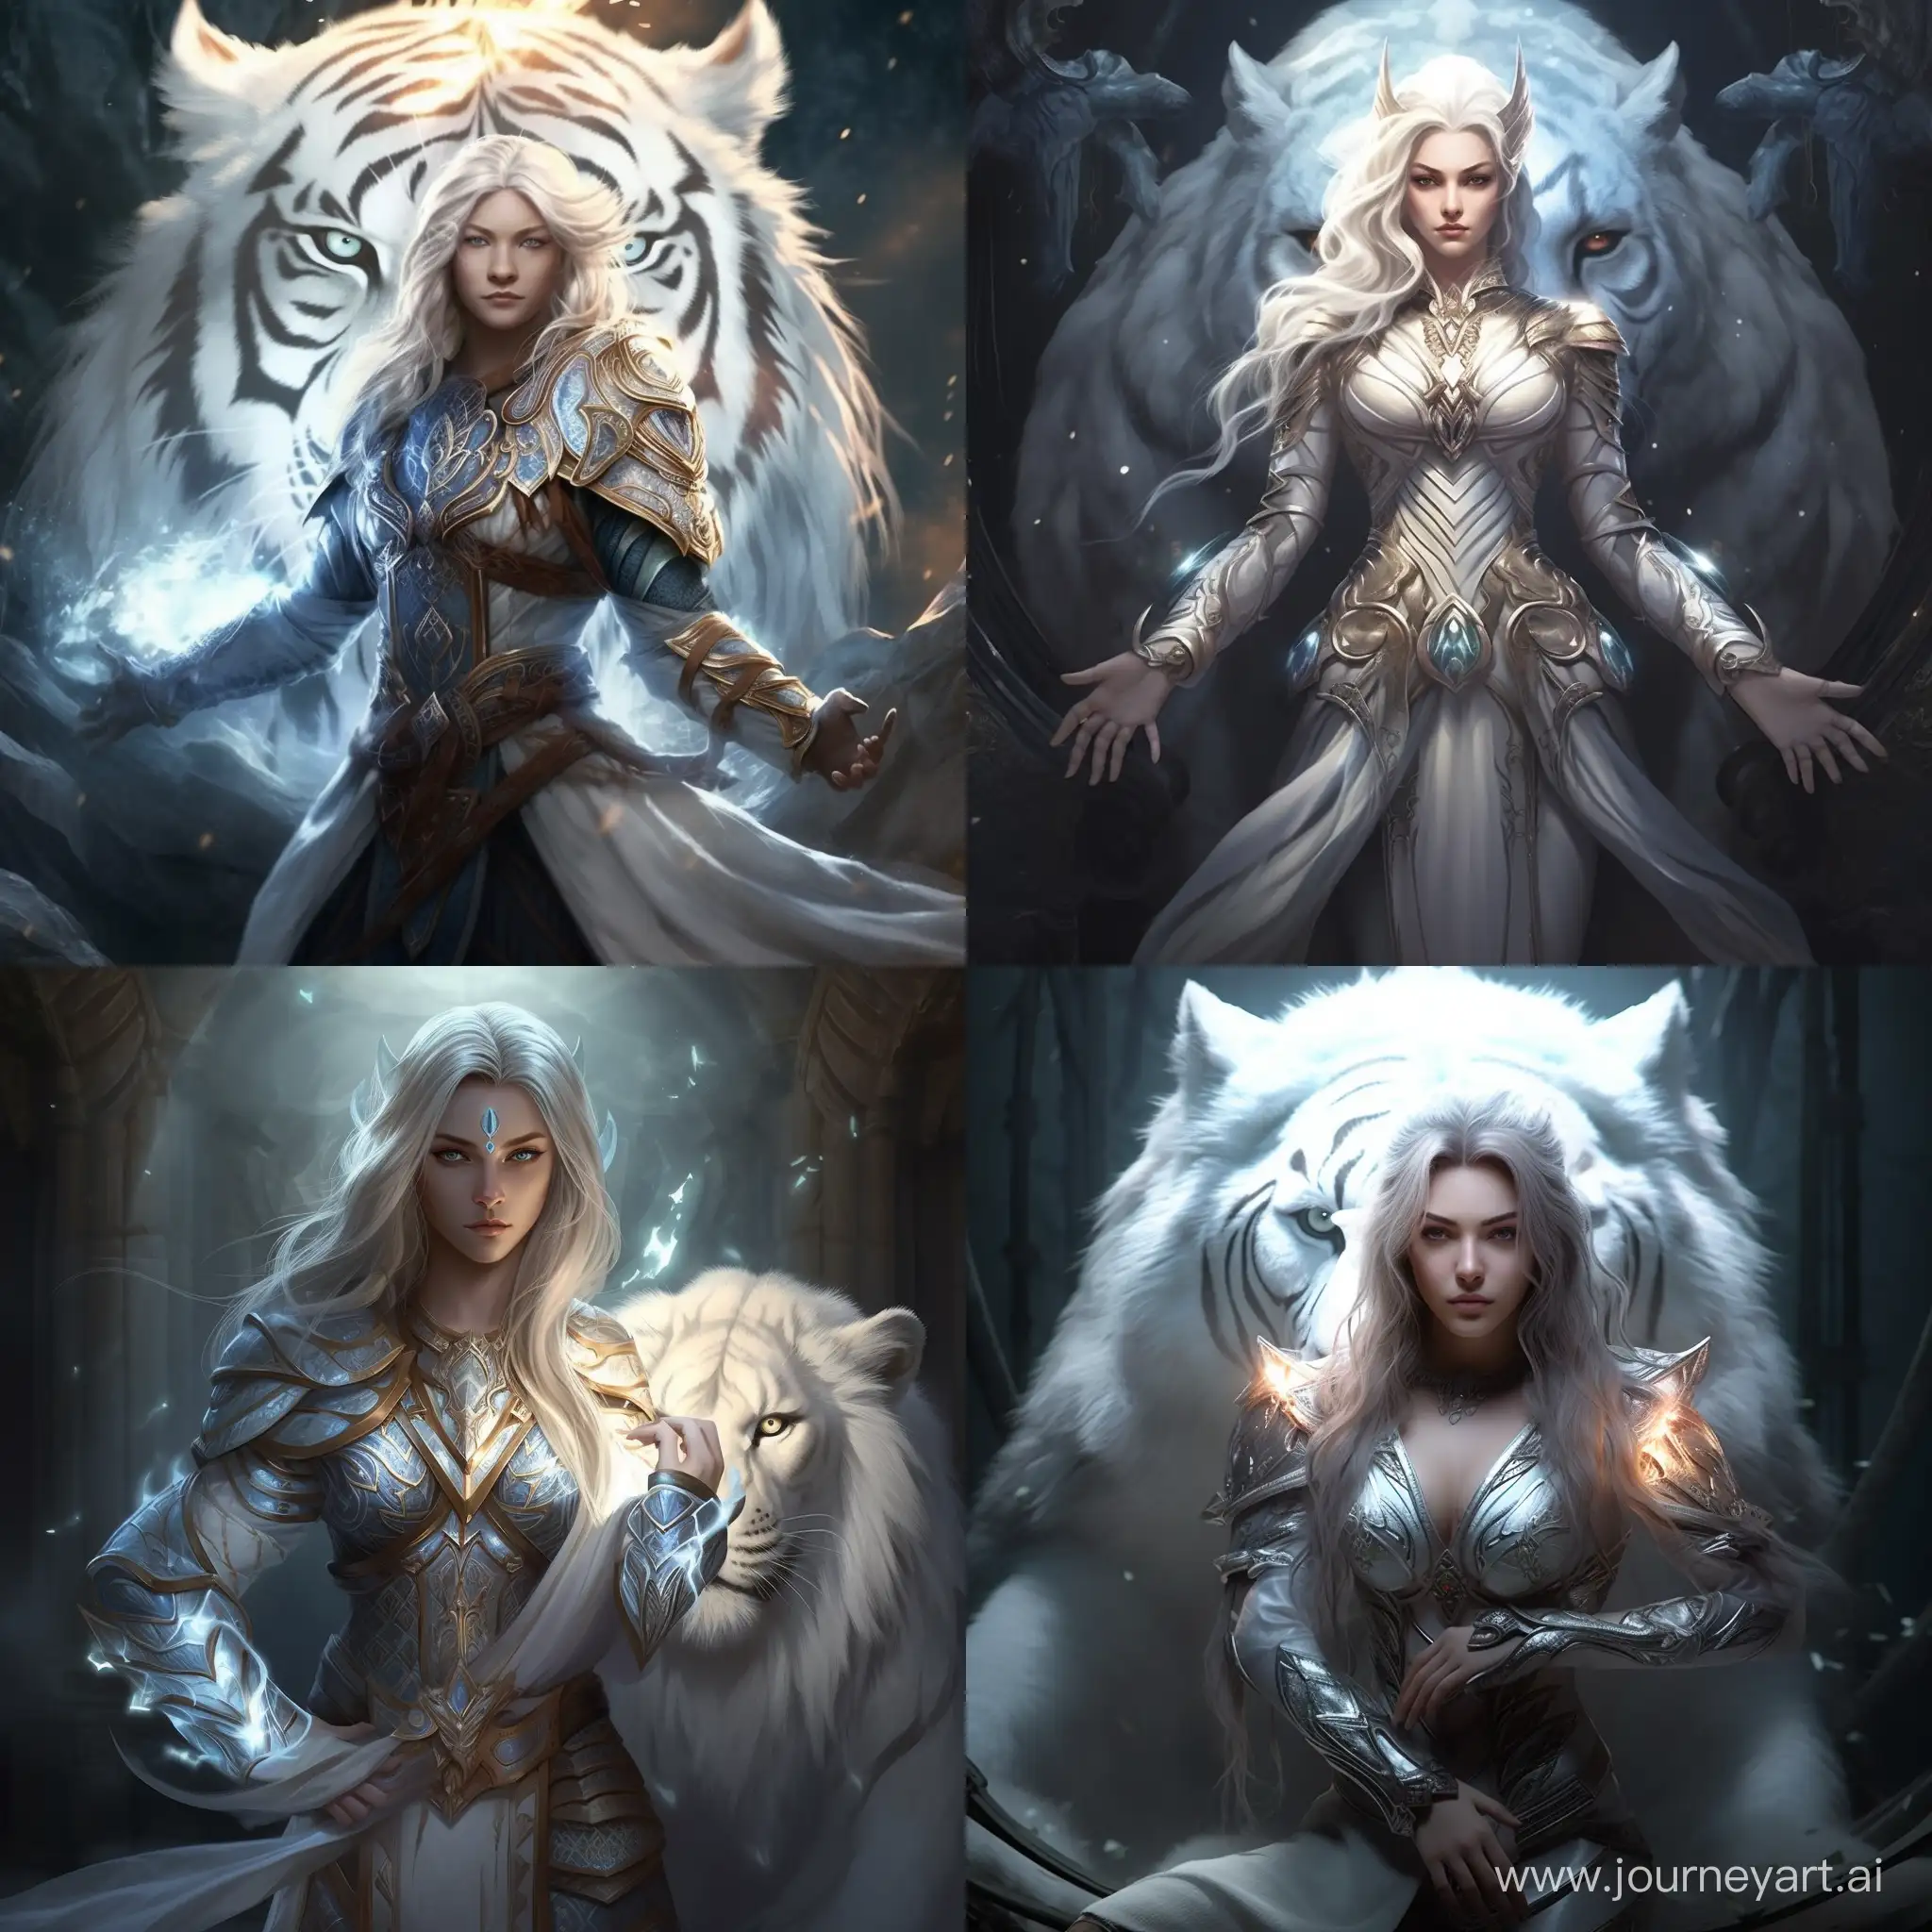 Radiant-Battle-Mage-with-Illusory-White-Tiger-Auras